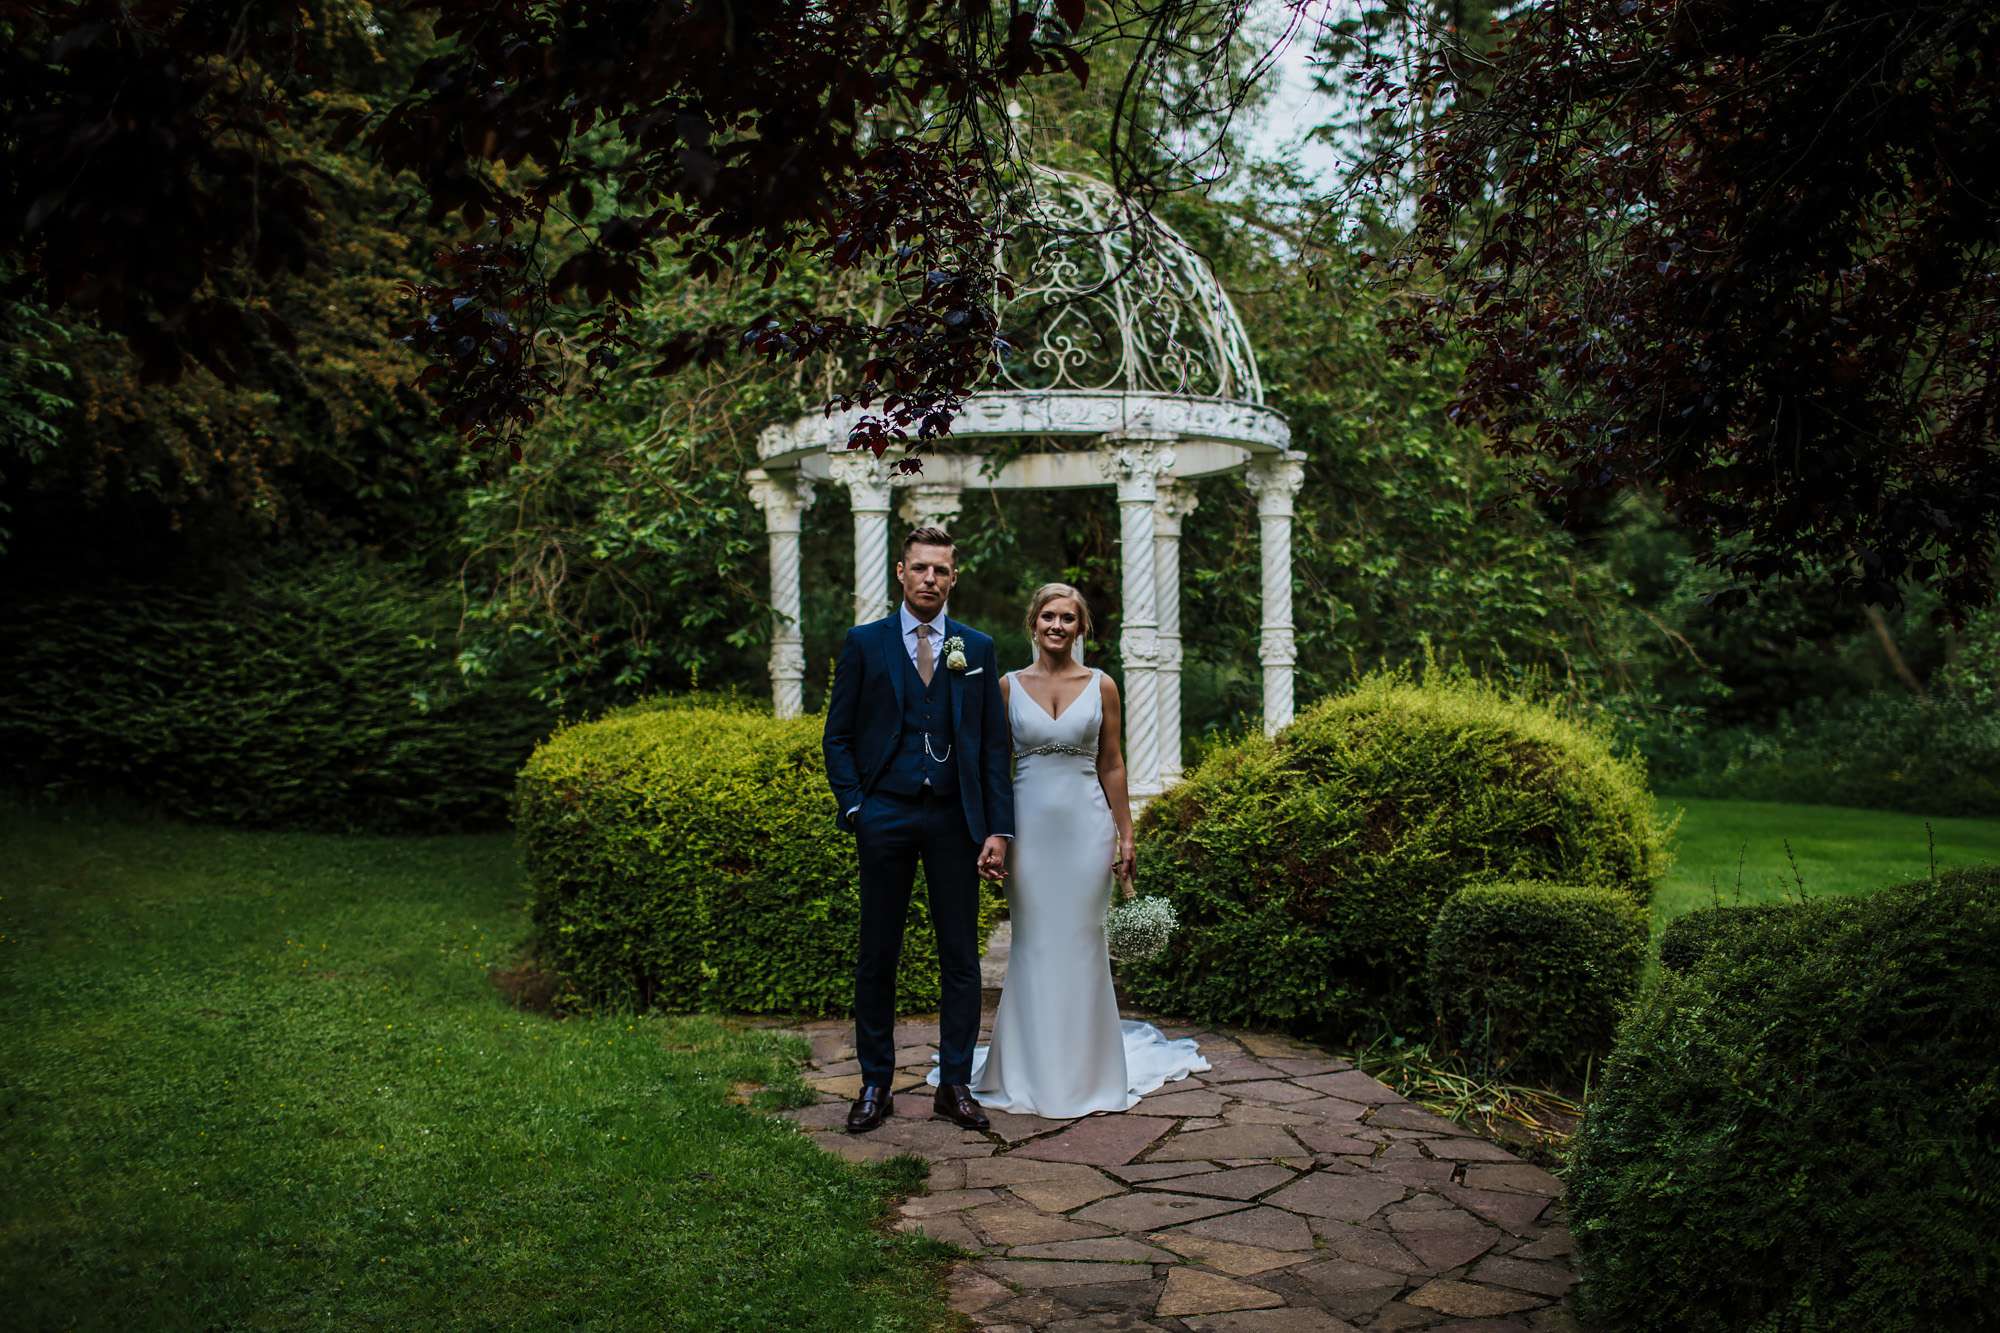 Bride and groom posing in front of a bandstand